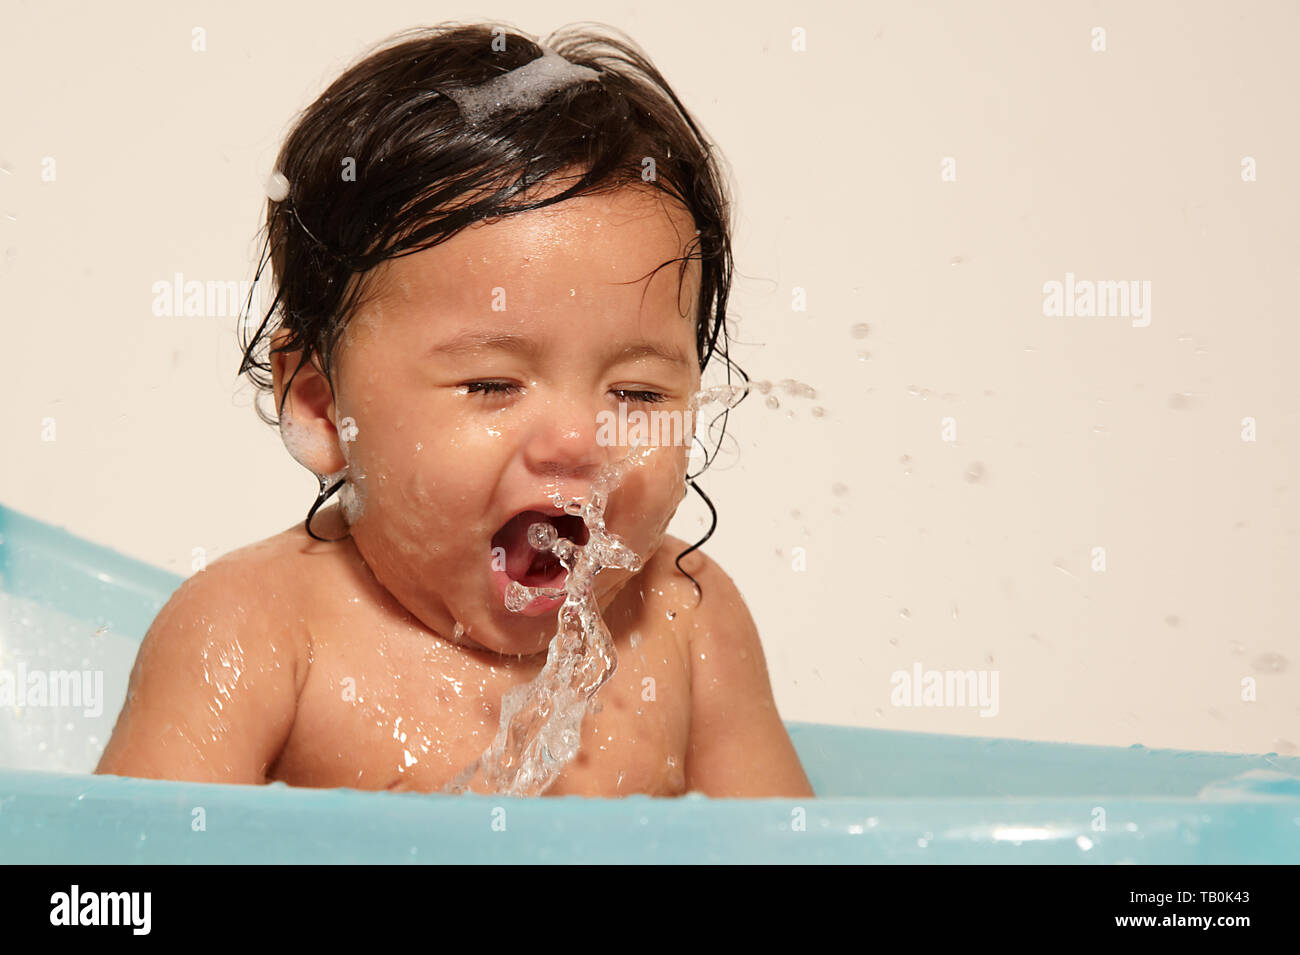 Super adorable cute baby girl happy and excited splashing in a ...